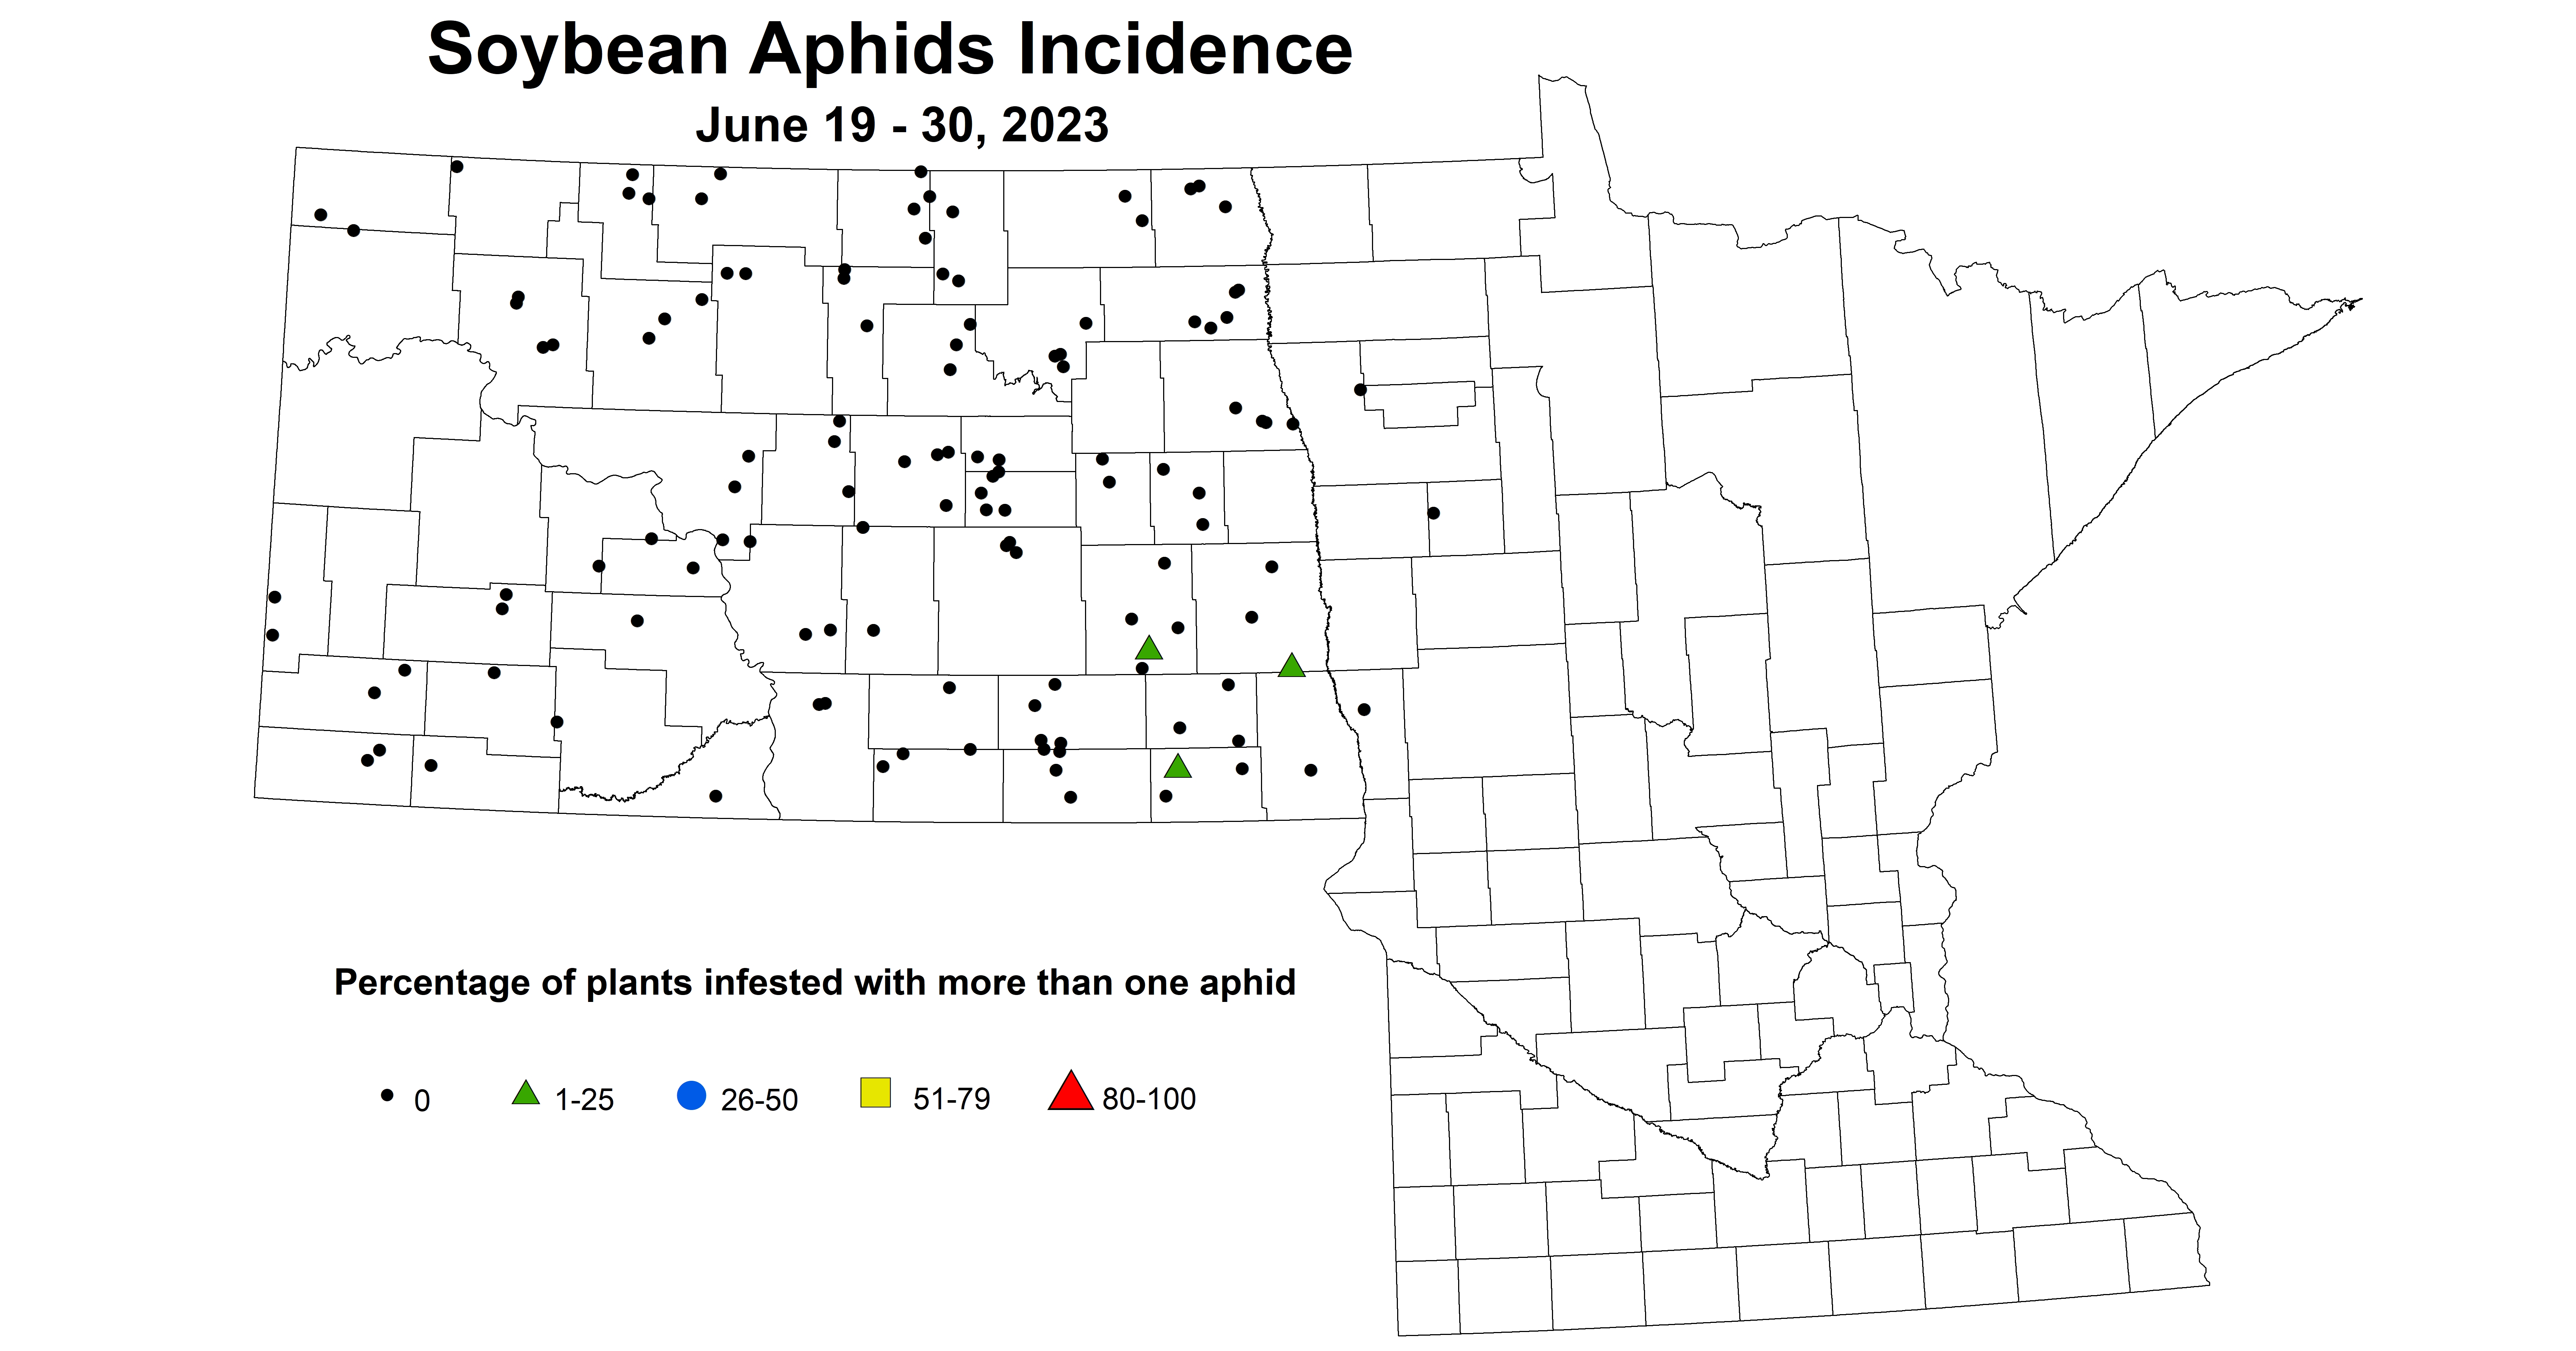 soybean aphid incidence June 19-30 2023